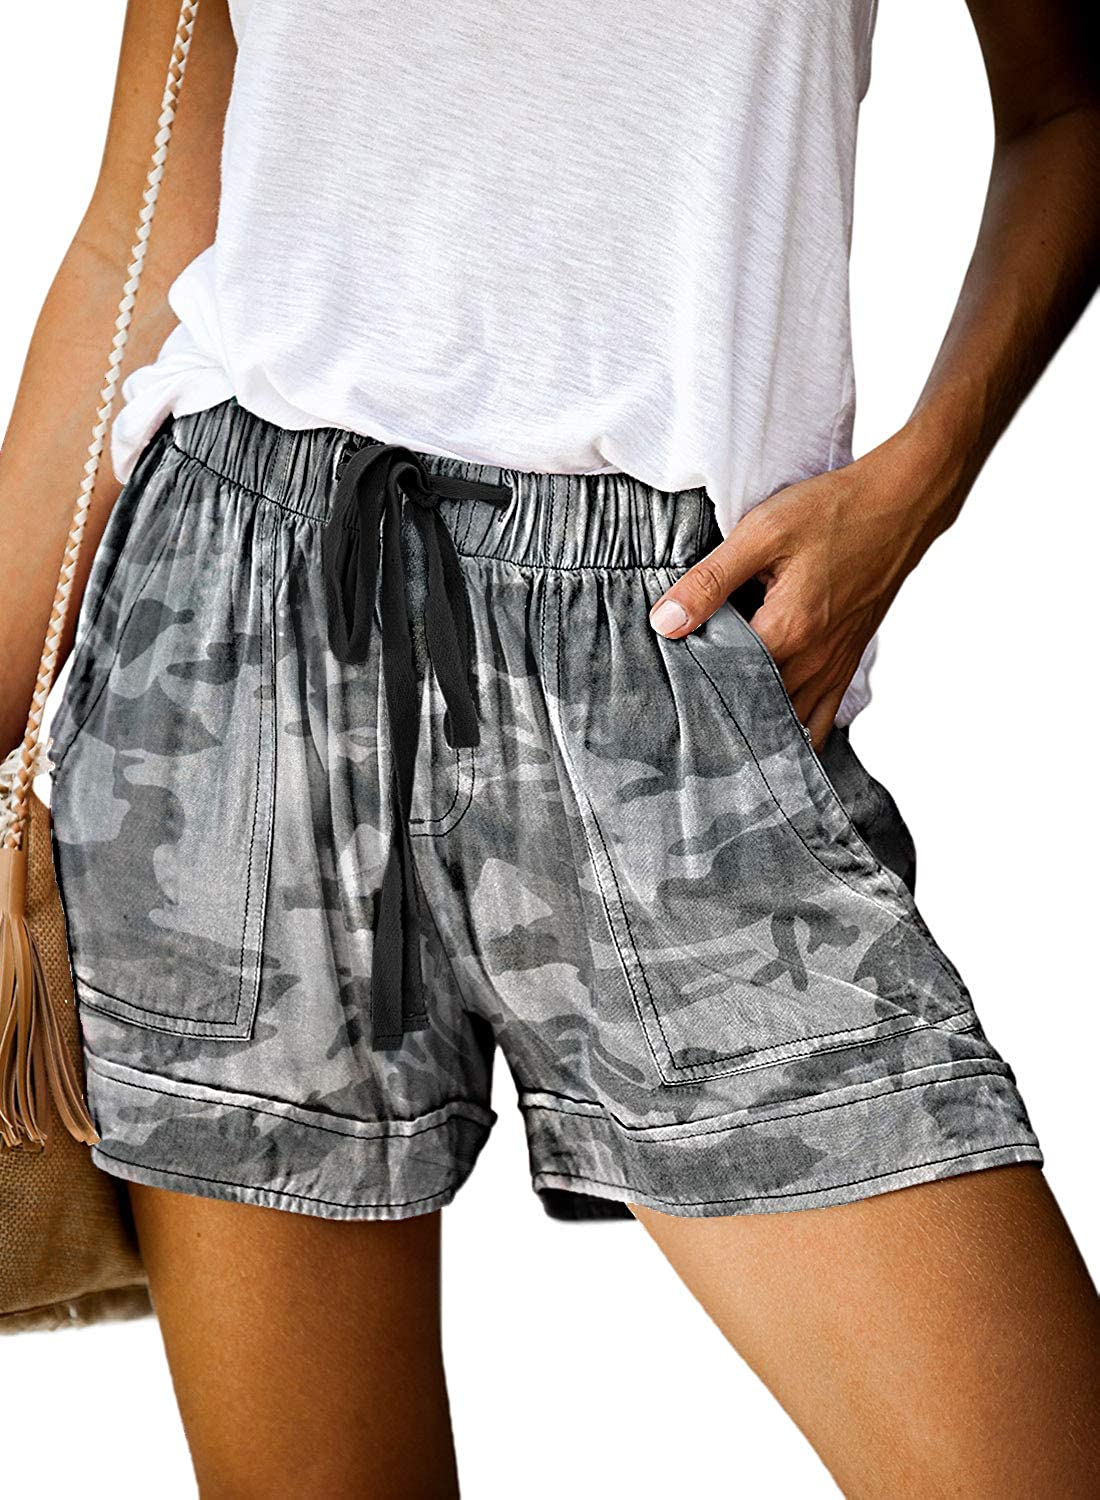 KINGFEN Comfy Drawstring Casual Elastic Waist Shorts for Women Summer Beach Cotton Pull On Short with Pockets